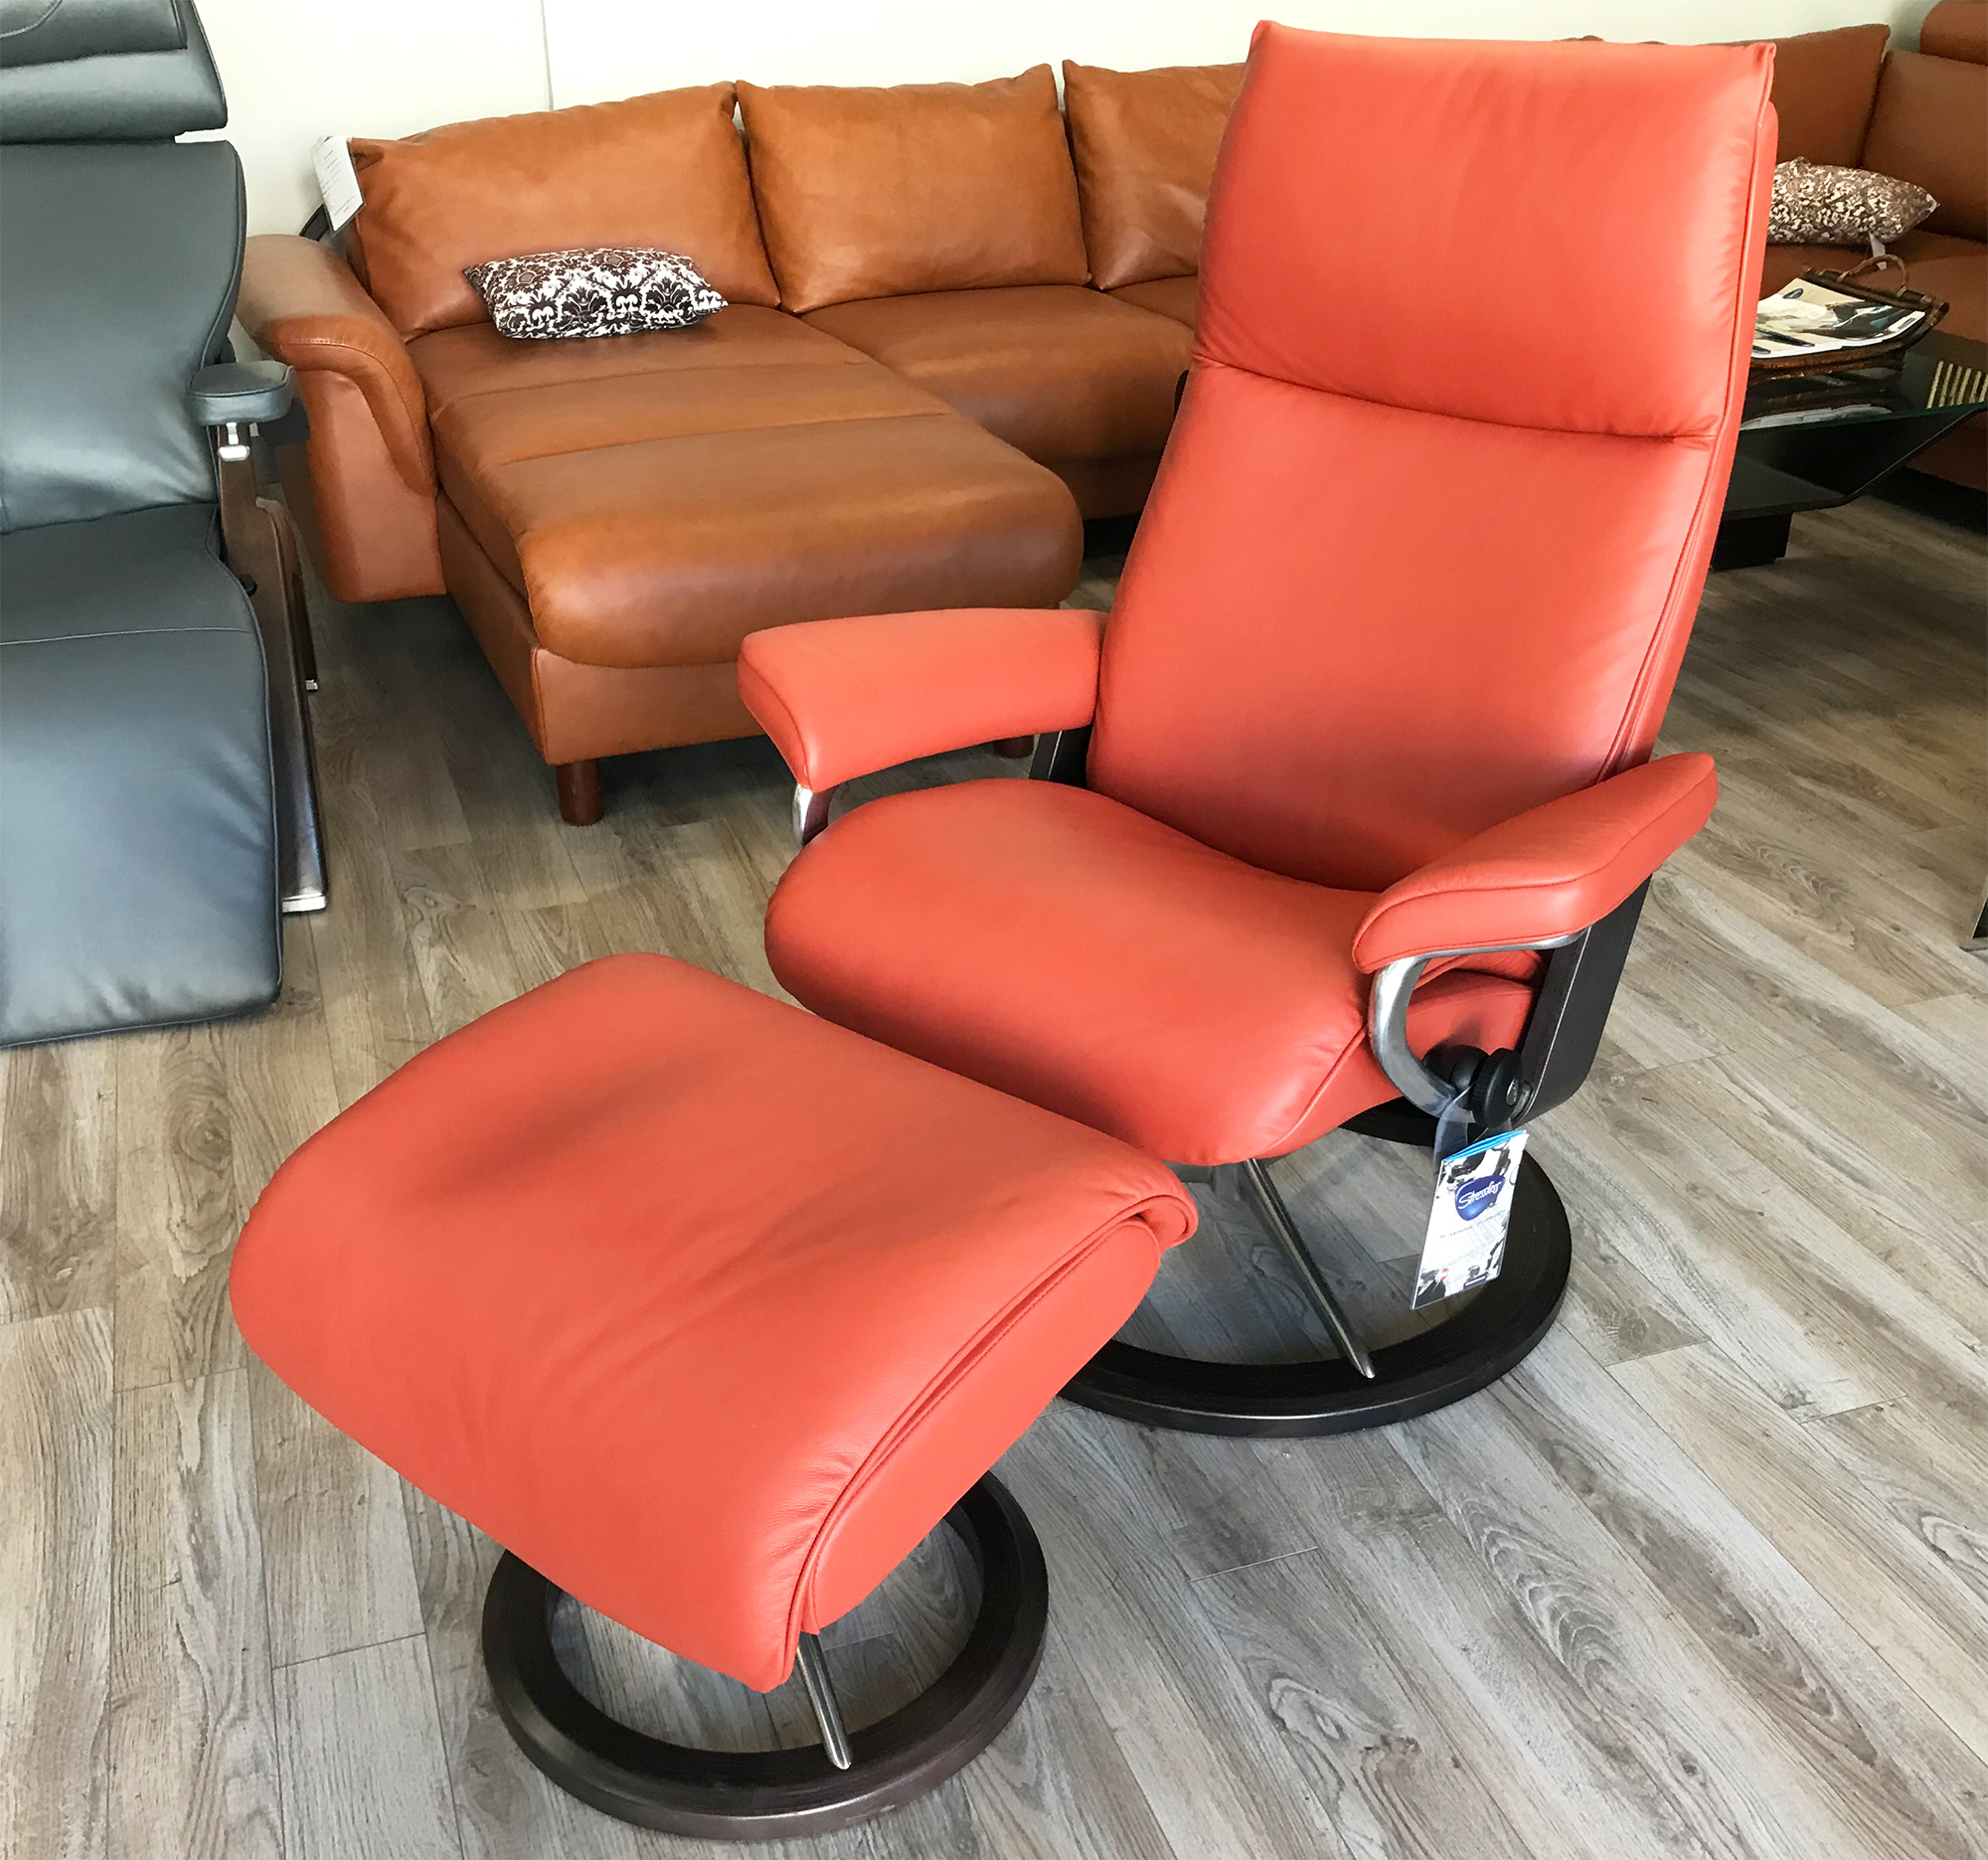 Stressless Aura Signature Paloma Aura Leather Ottoman Base Recliners Leather Henna and Stressless Chair Chairs Henna - Ekornes Paloma Base by Signature Recliner